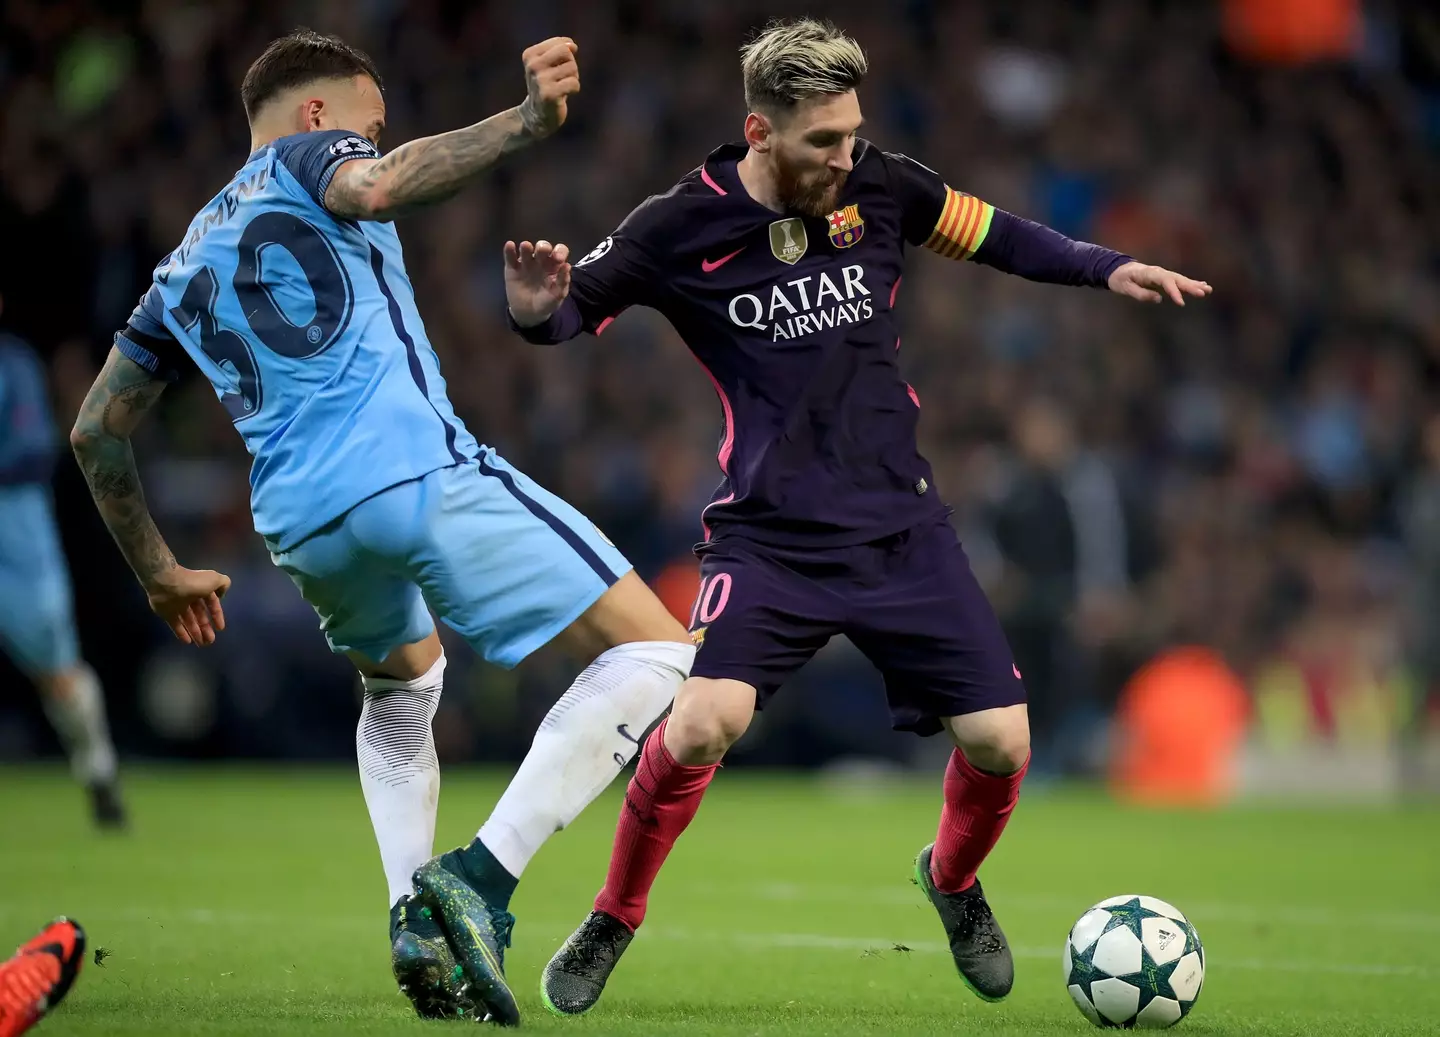 Messi is challenged by Otamendi. (Image